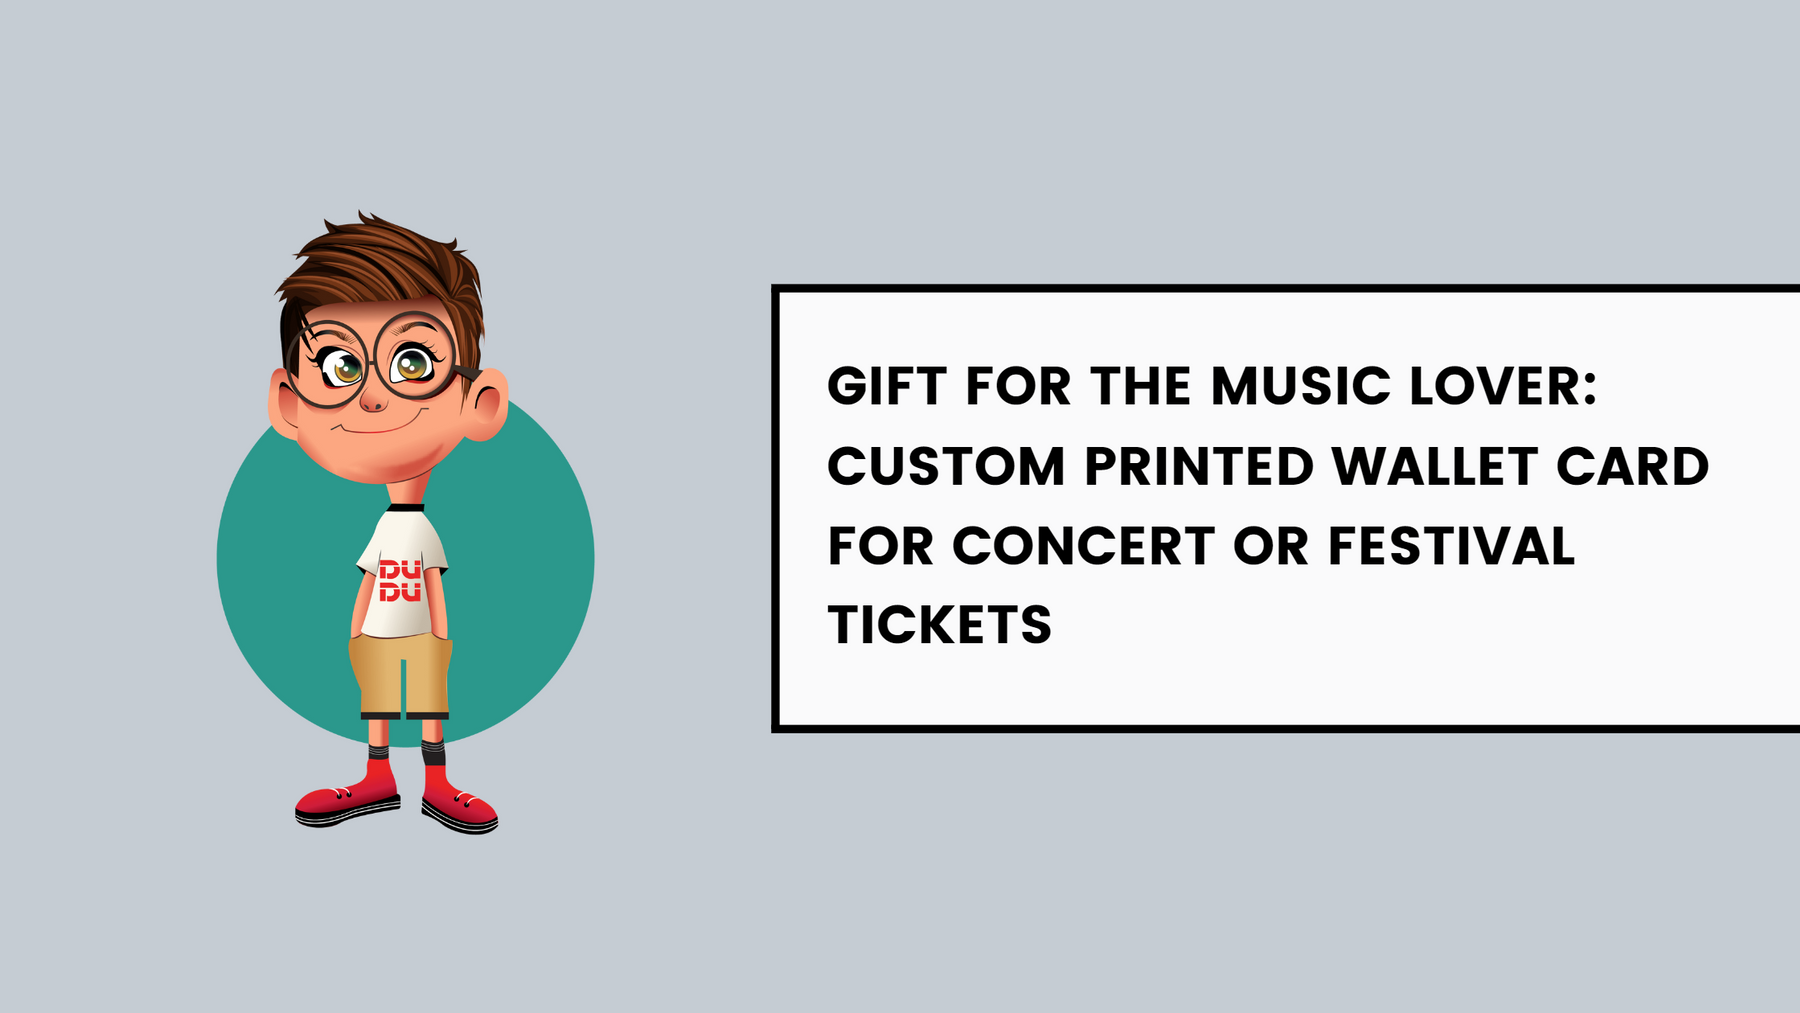 Gift For The Music Lover: Custom Printed Wallet Card For Concert Or Festival Tickets